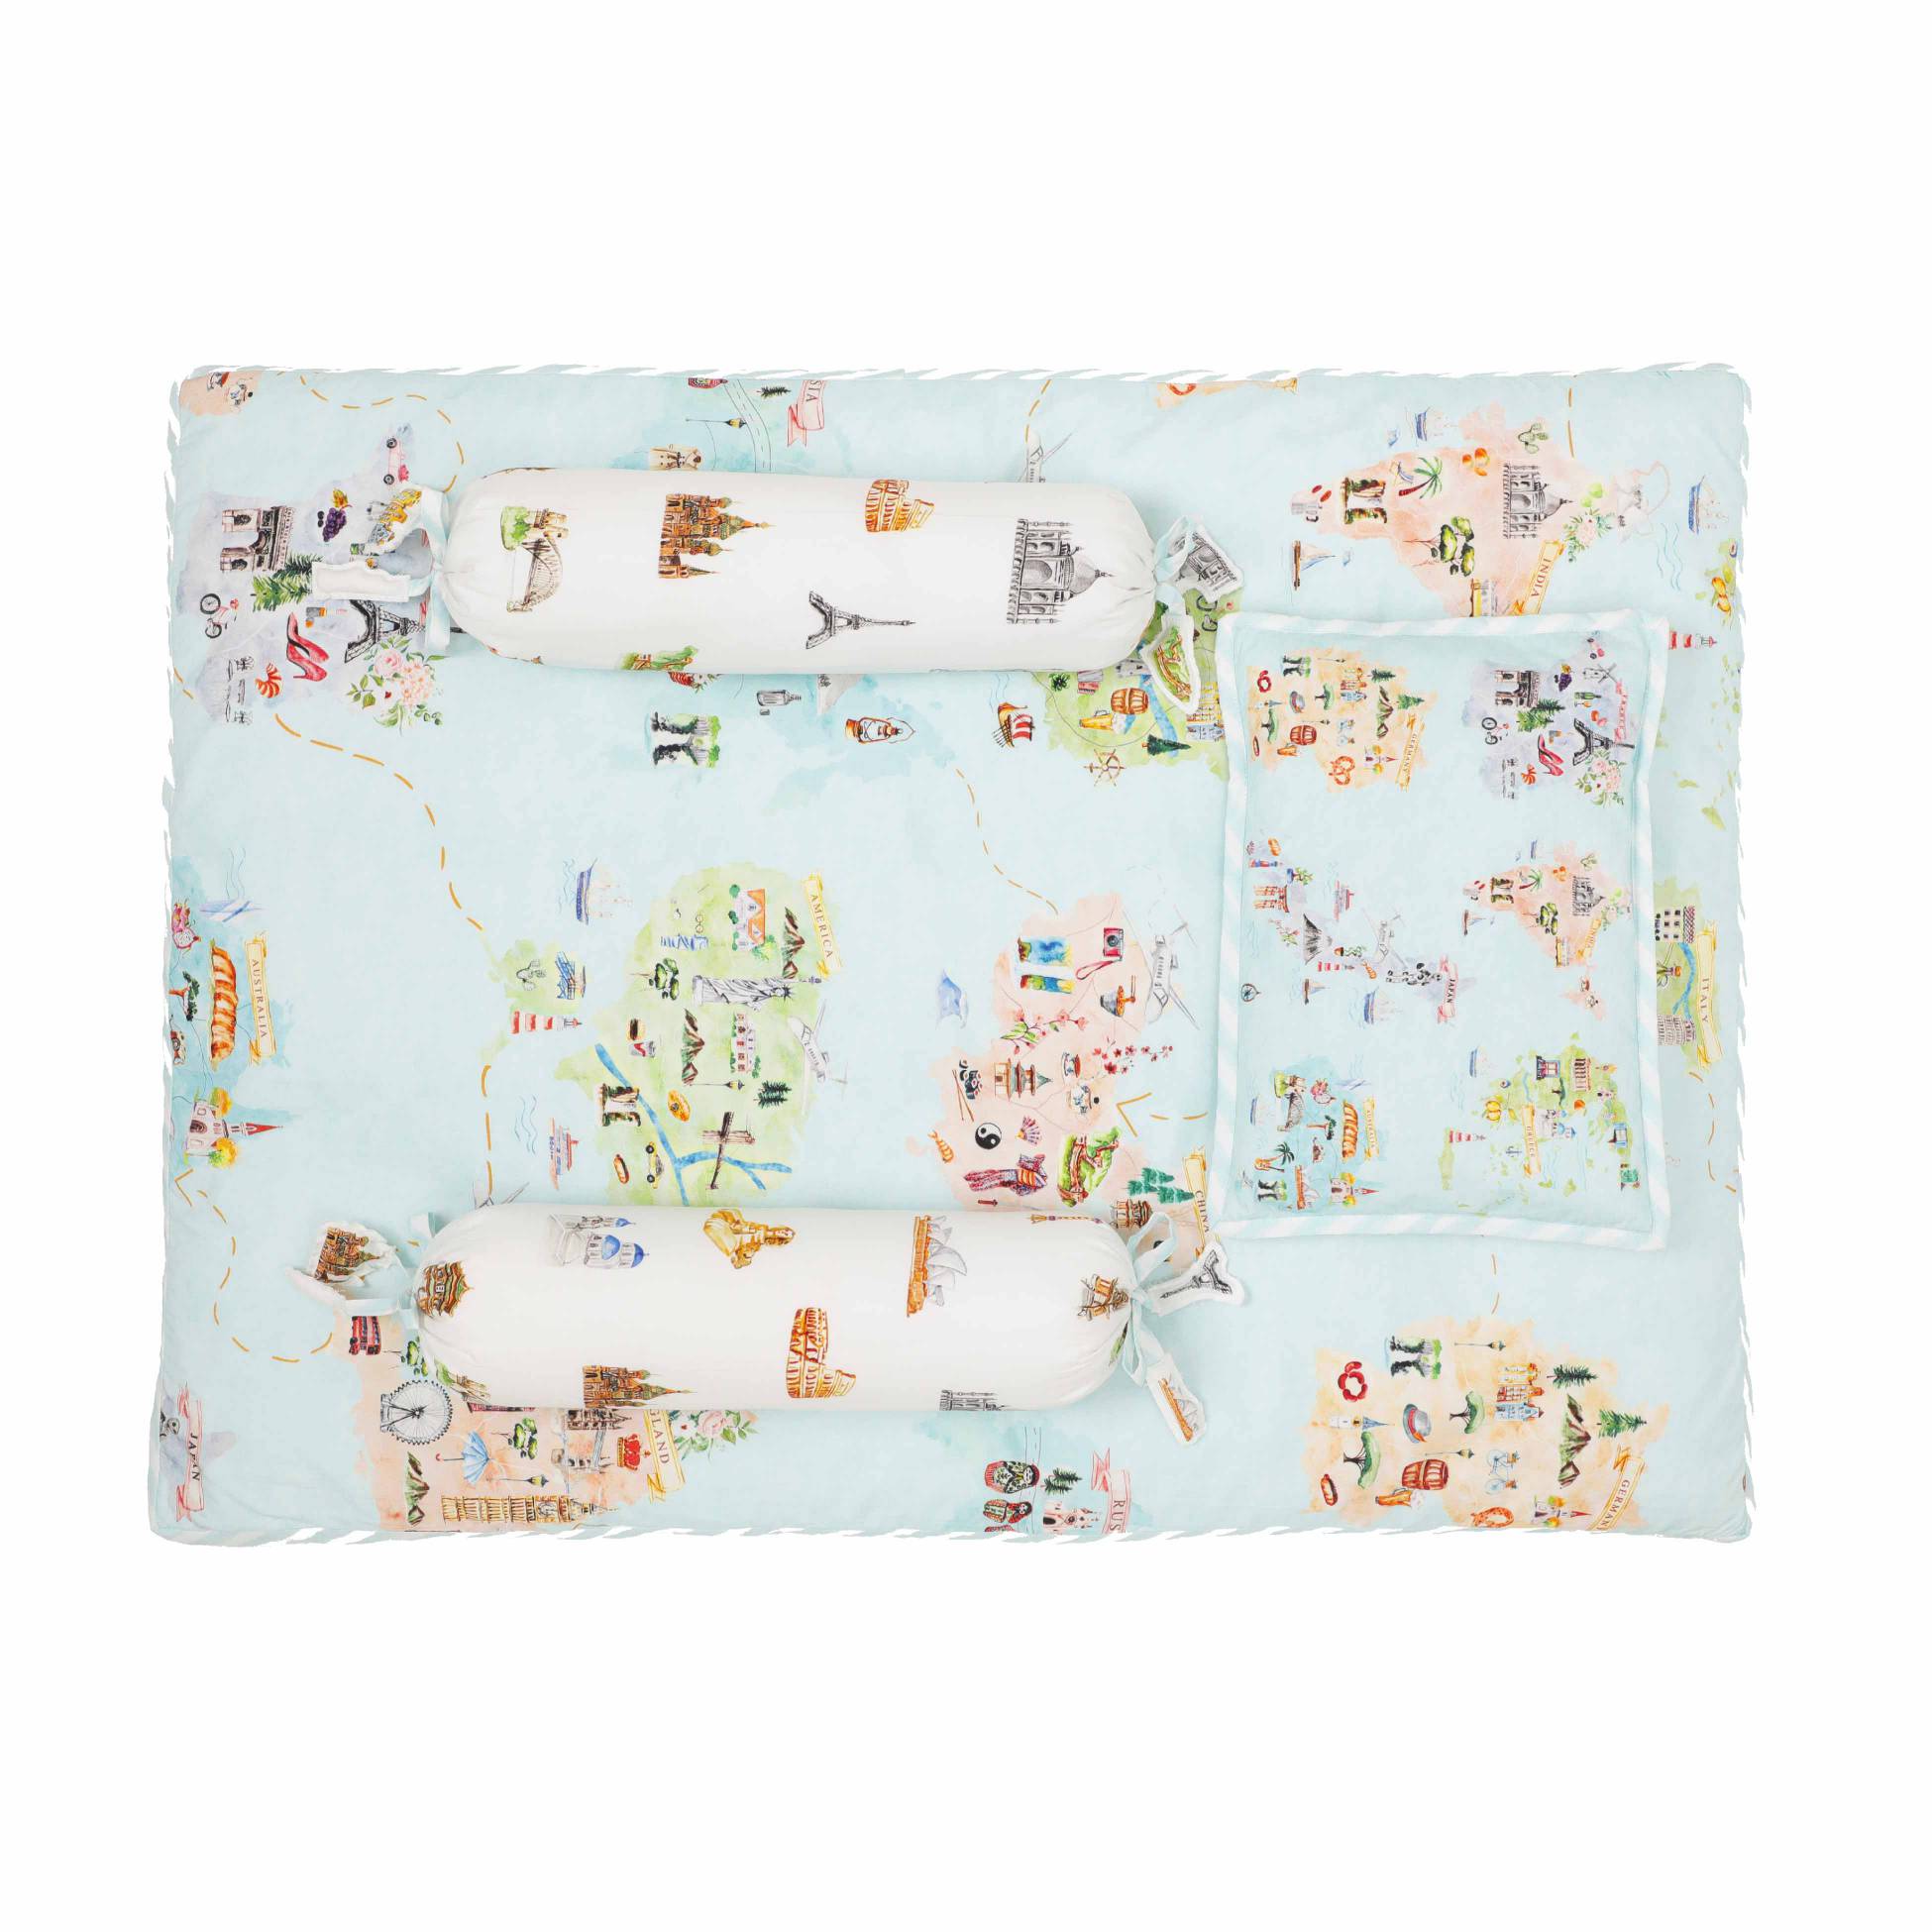 Born To Travel - Snuggly Baby Bed